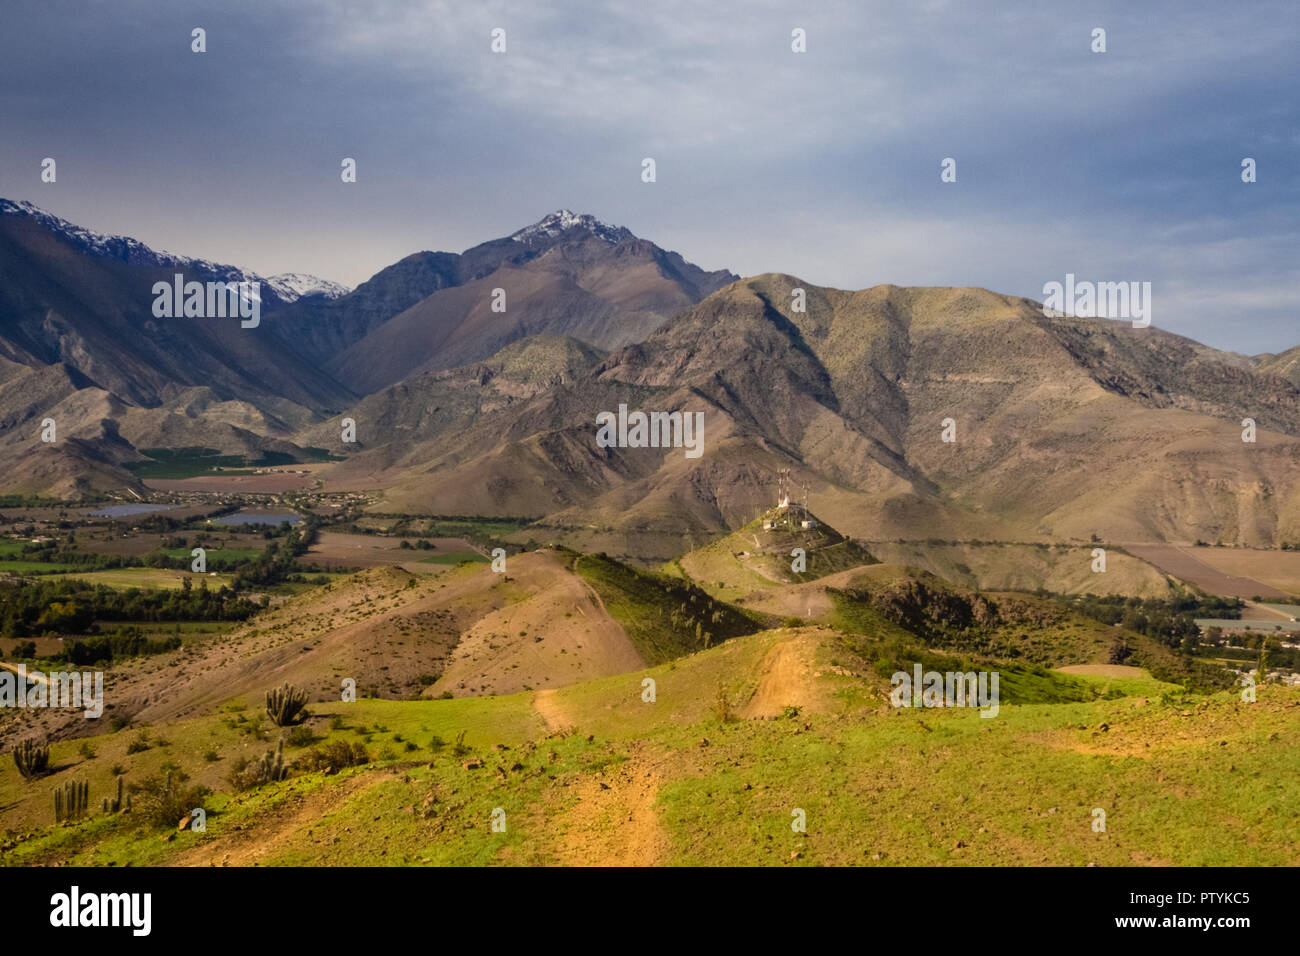 Cactus, mountains and valleys near Vicuña Vicuna city. Elqui Valley in Chile Stock Photo